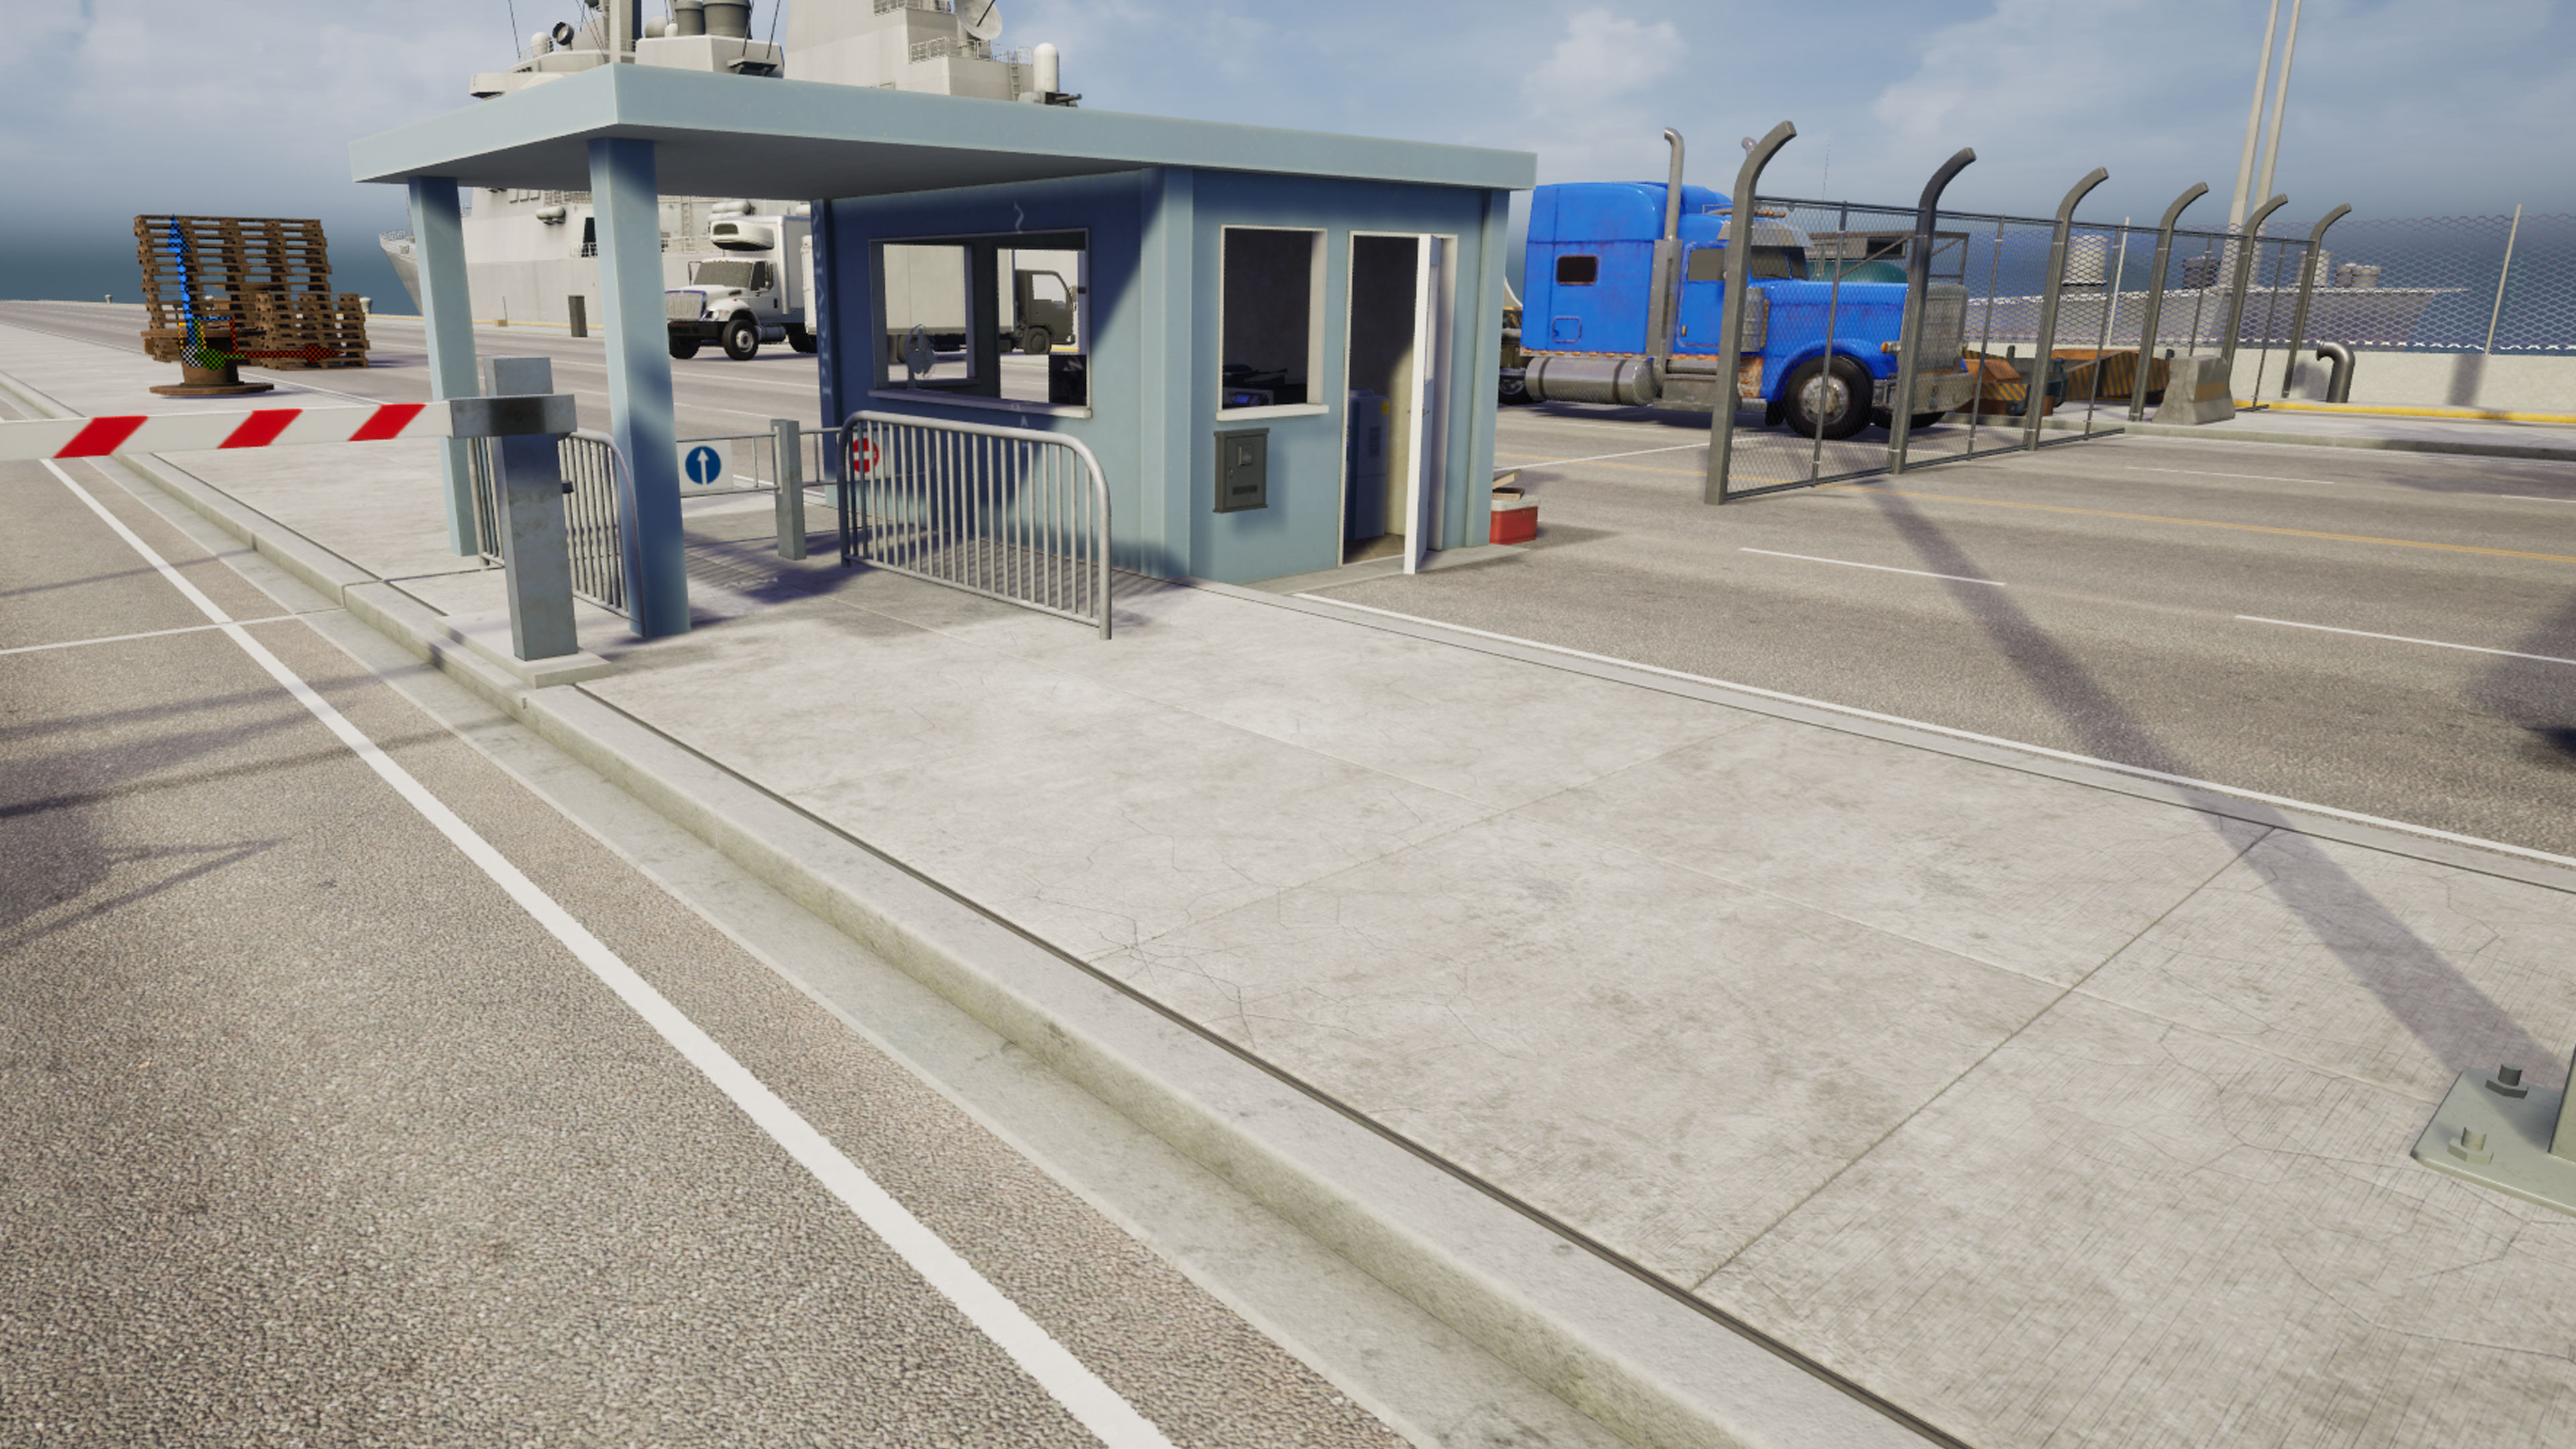 Navy pier demo project. Checkpoint and guard shack. Created in 2019